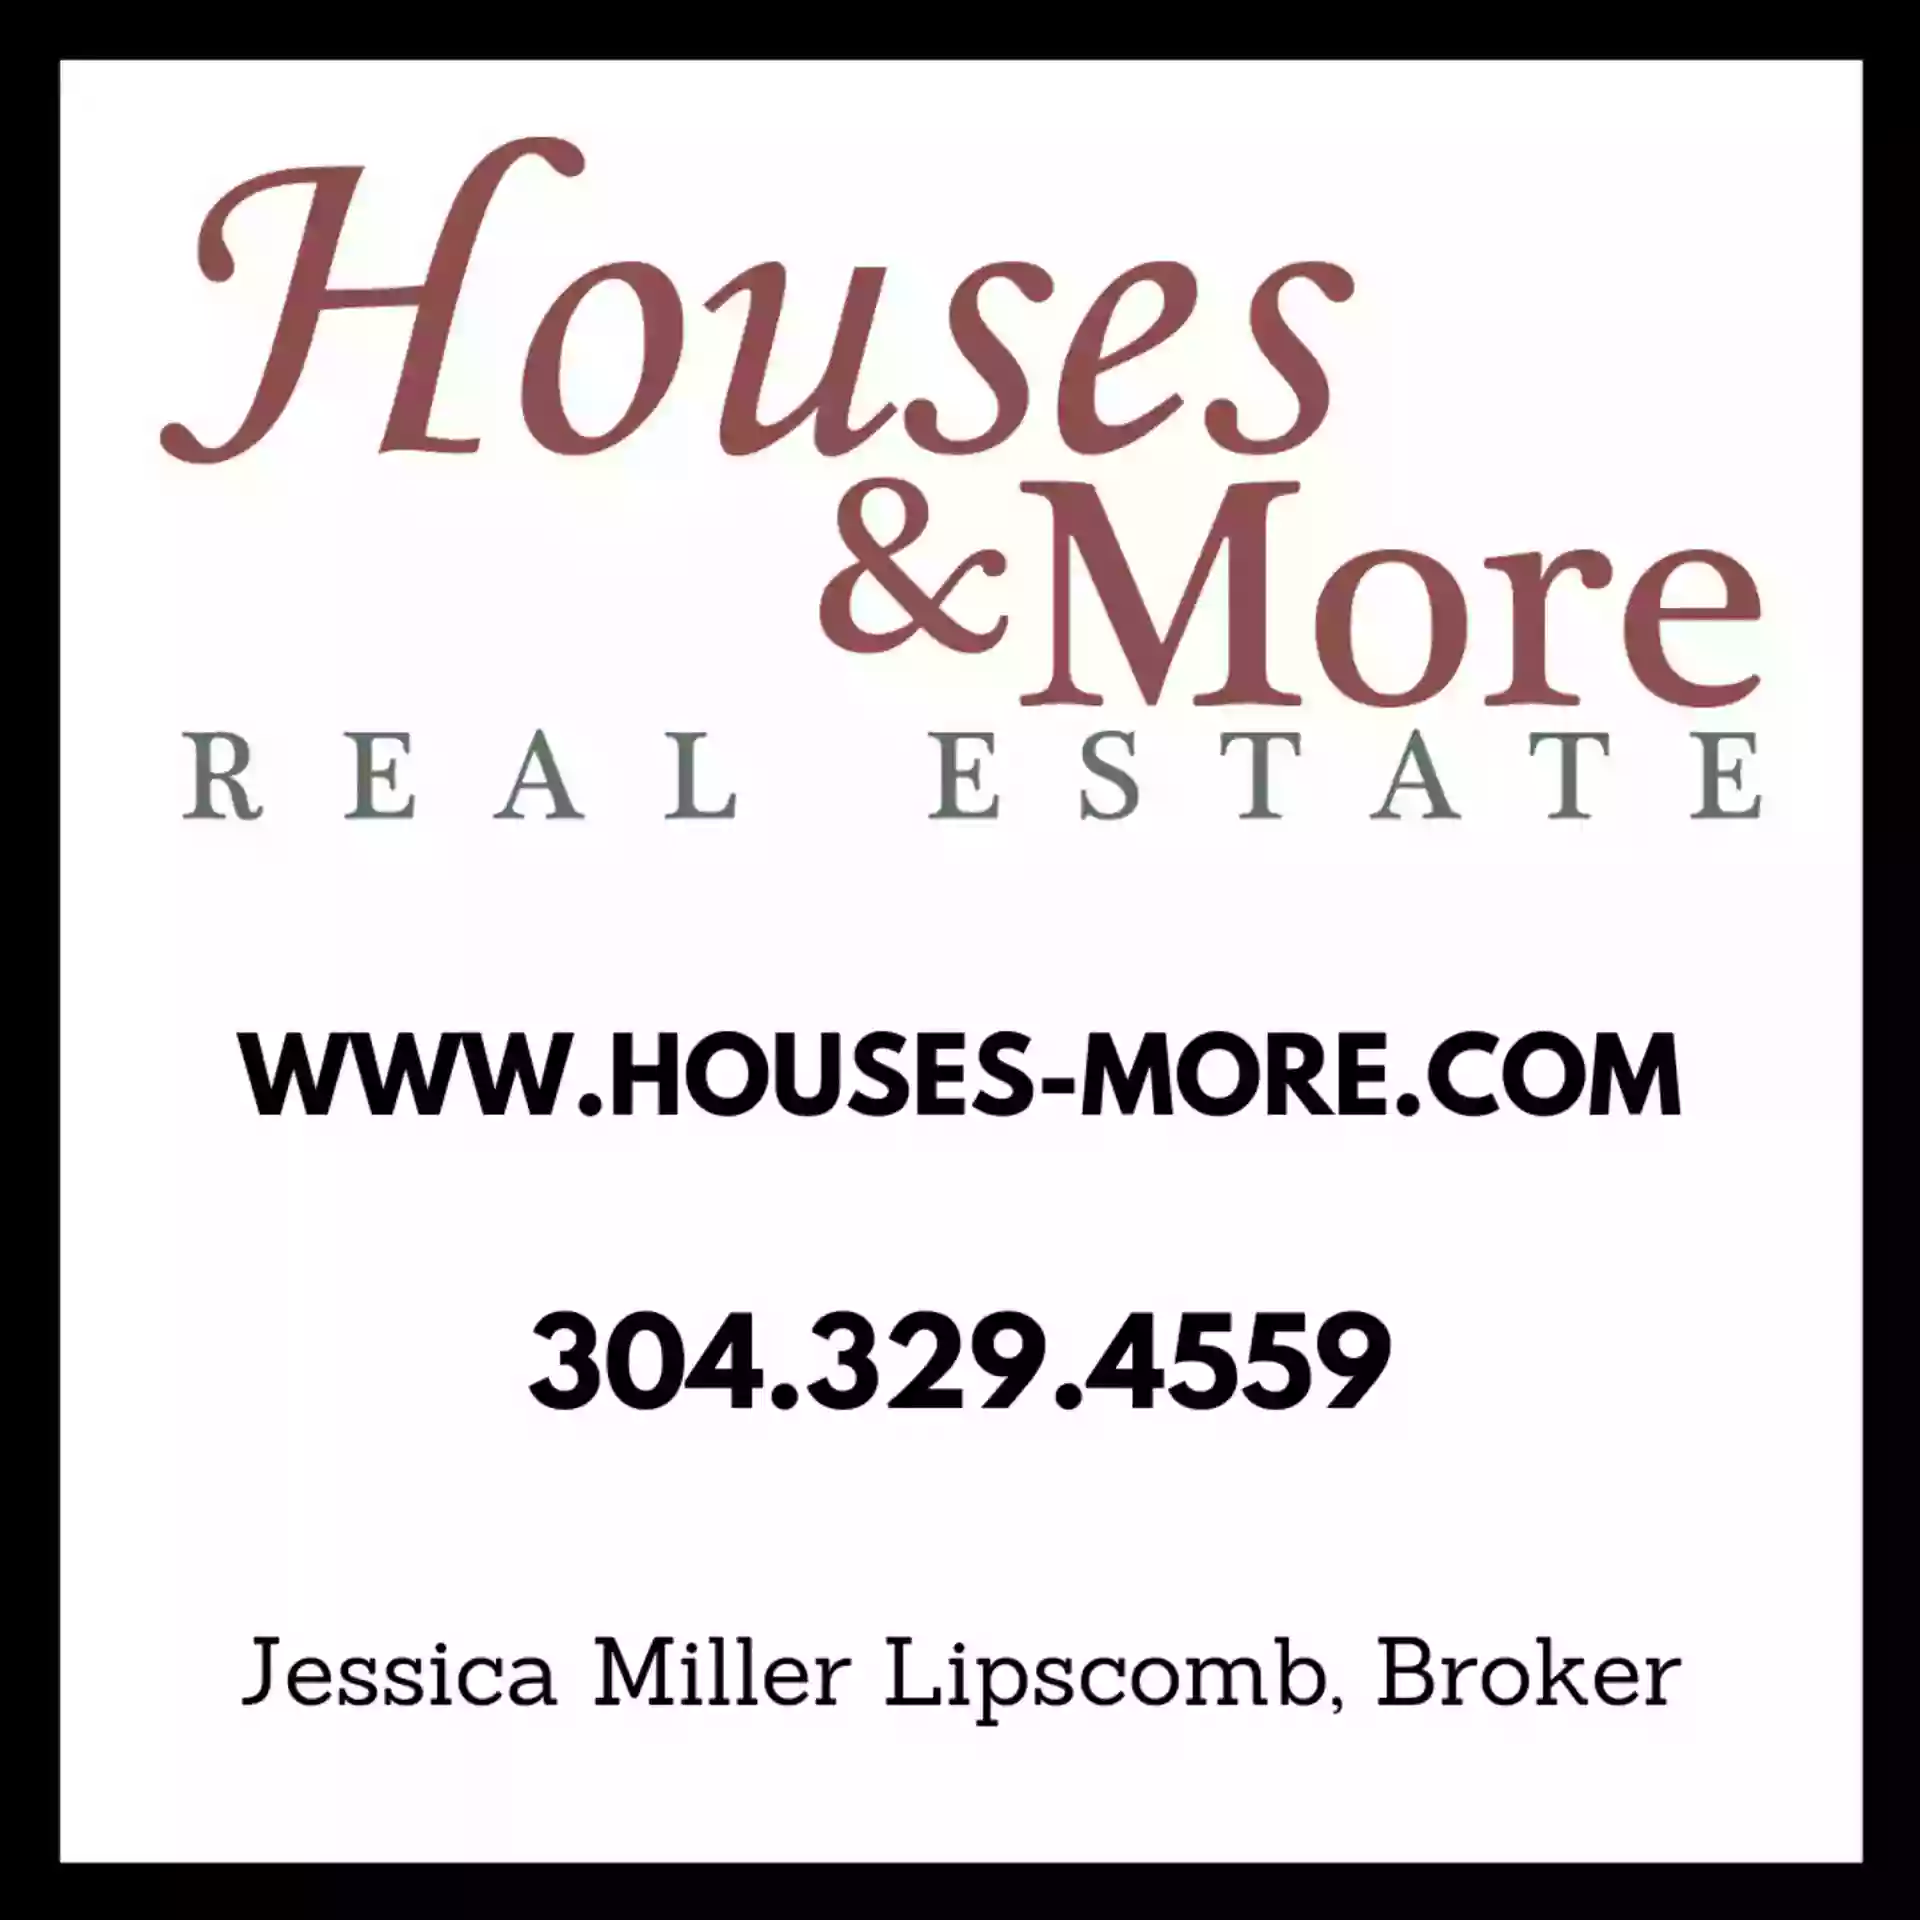 Houses & More Real Estate